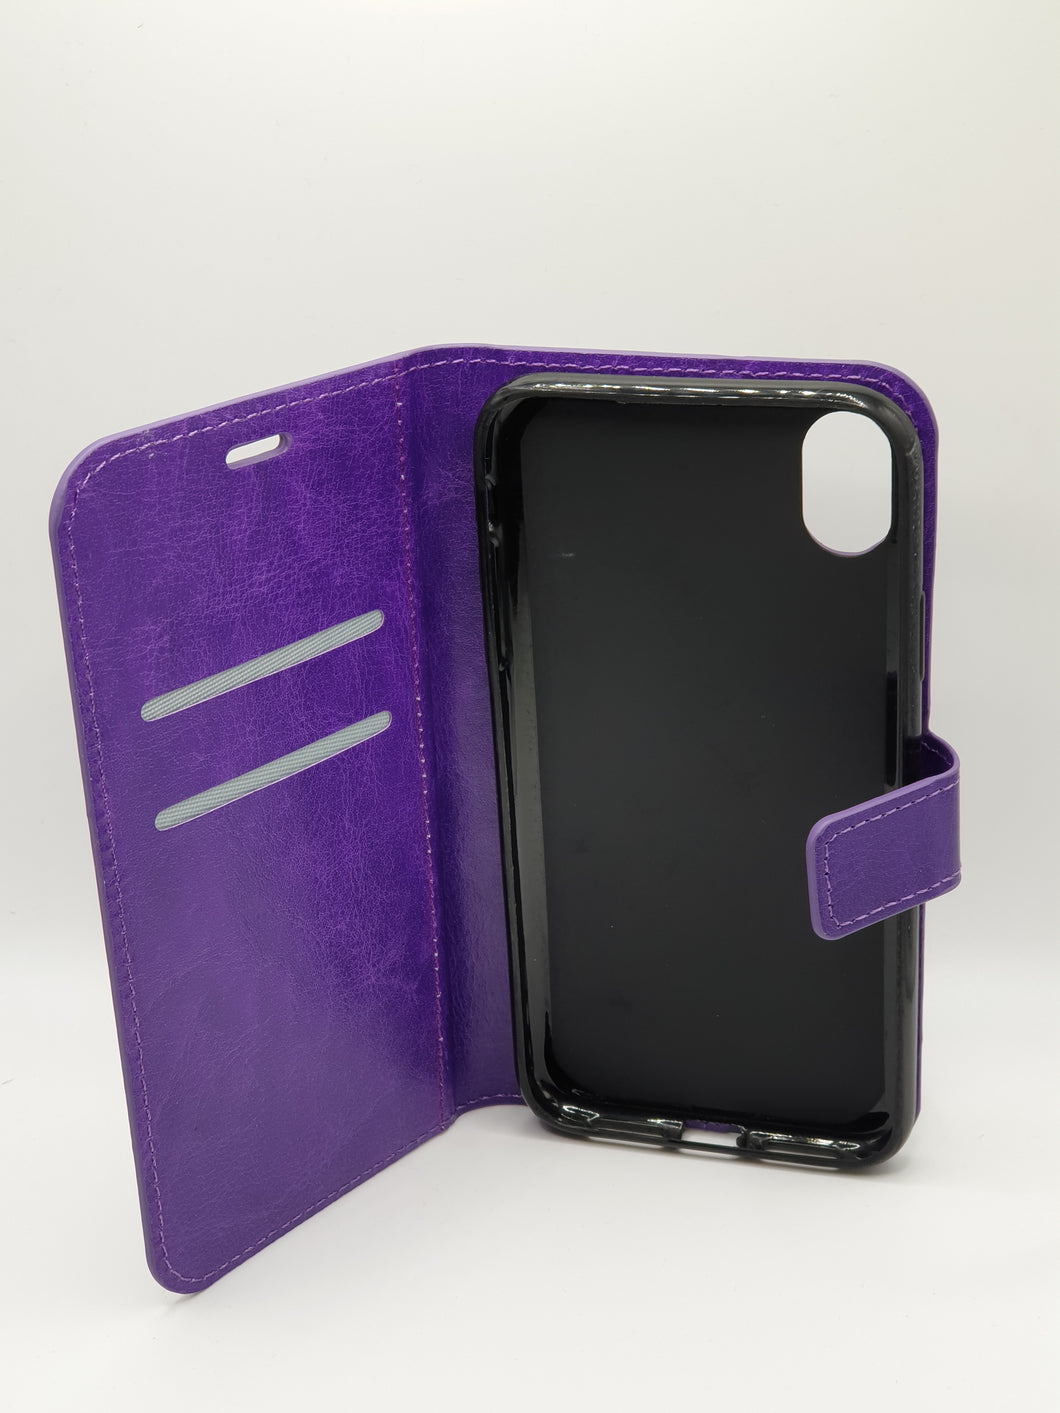 iPhone XR Wallet Card insert Case in Purple Cover Leather Style Full Protection Stylish Design Stand Up